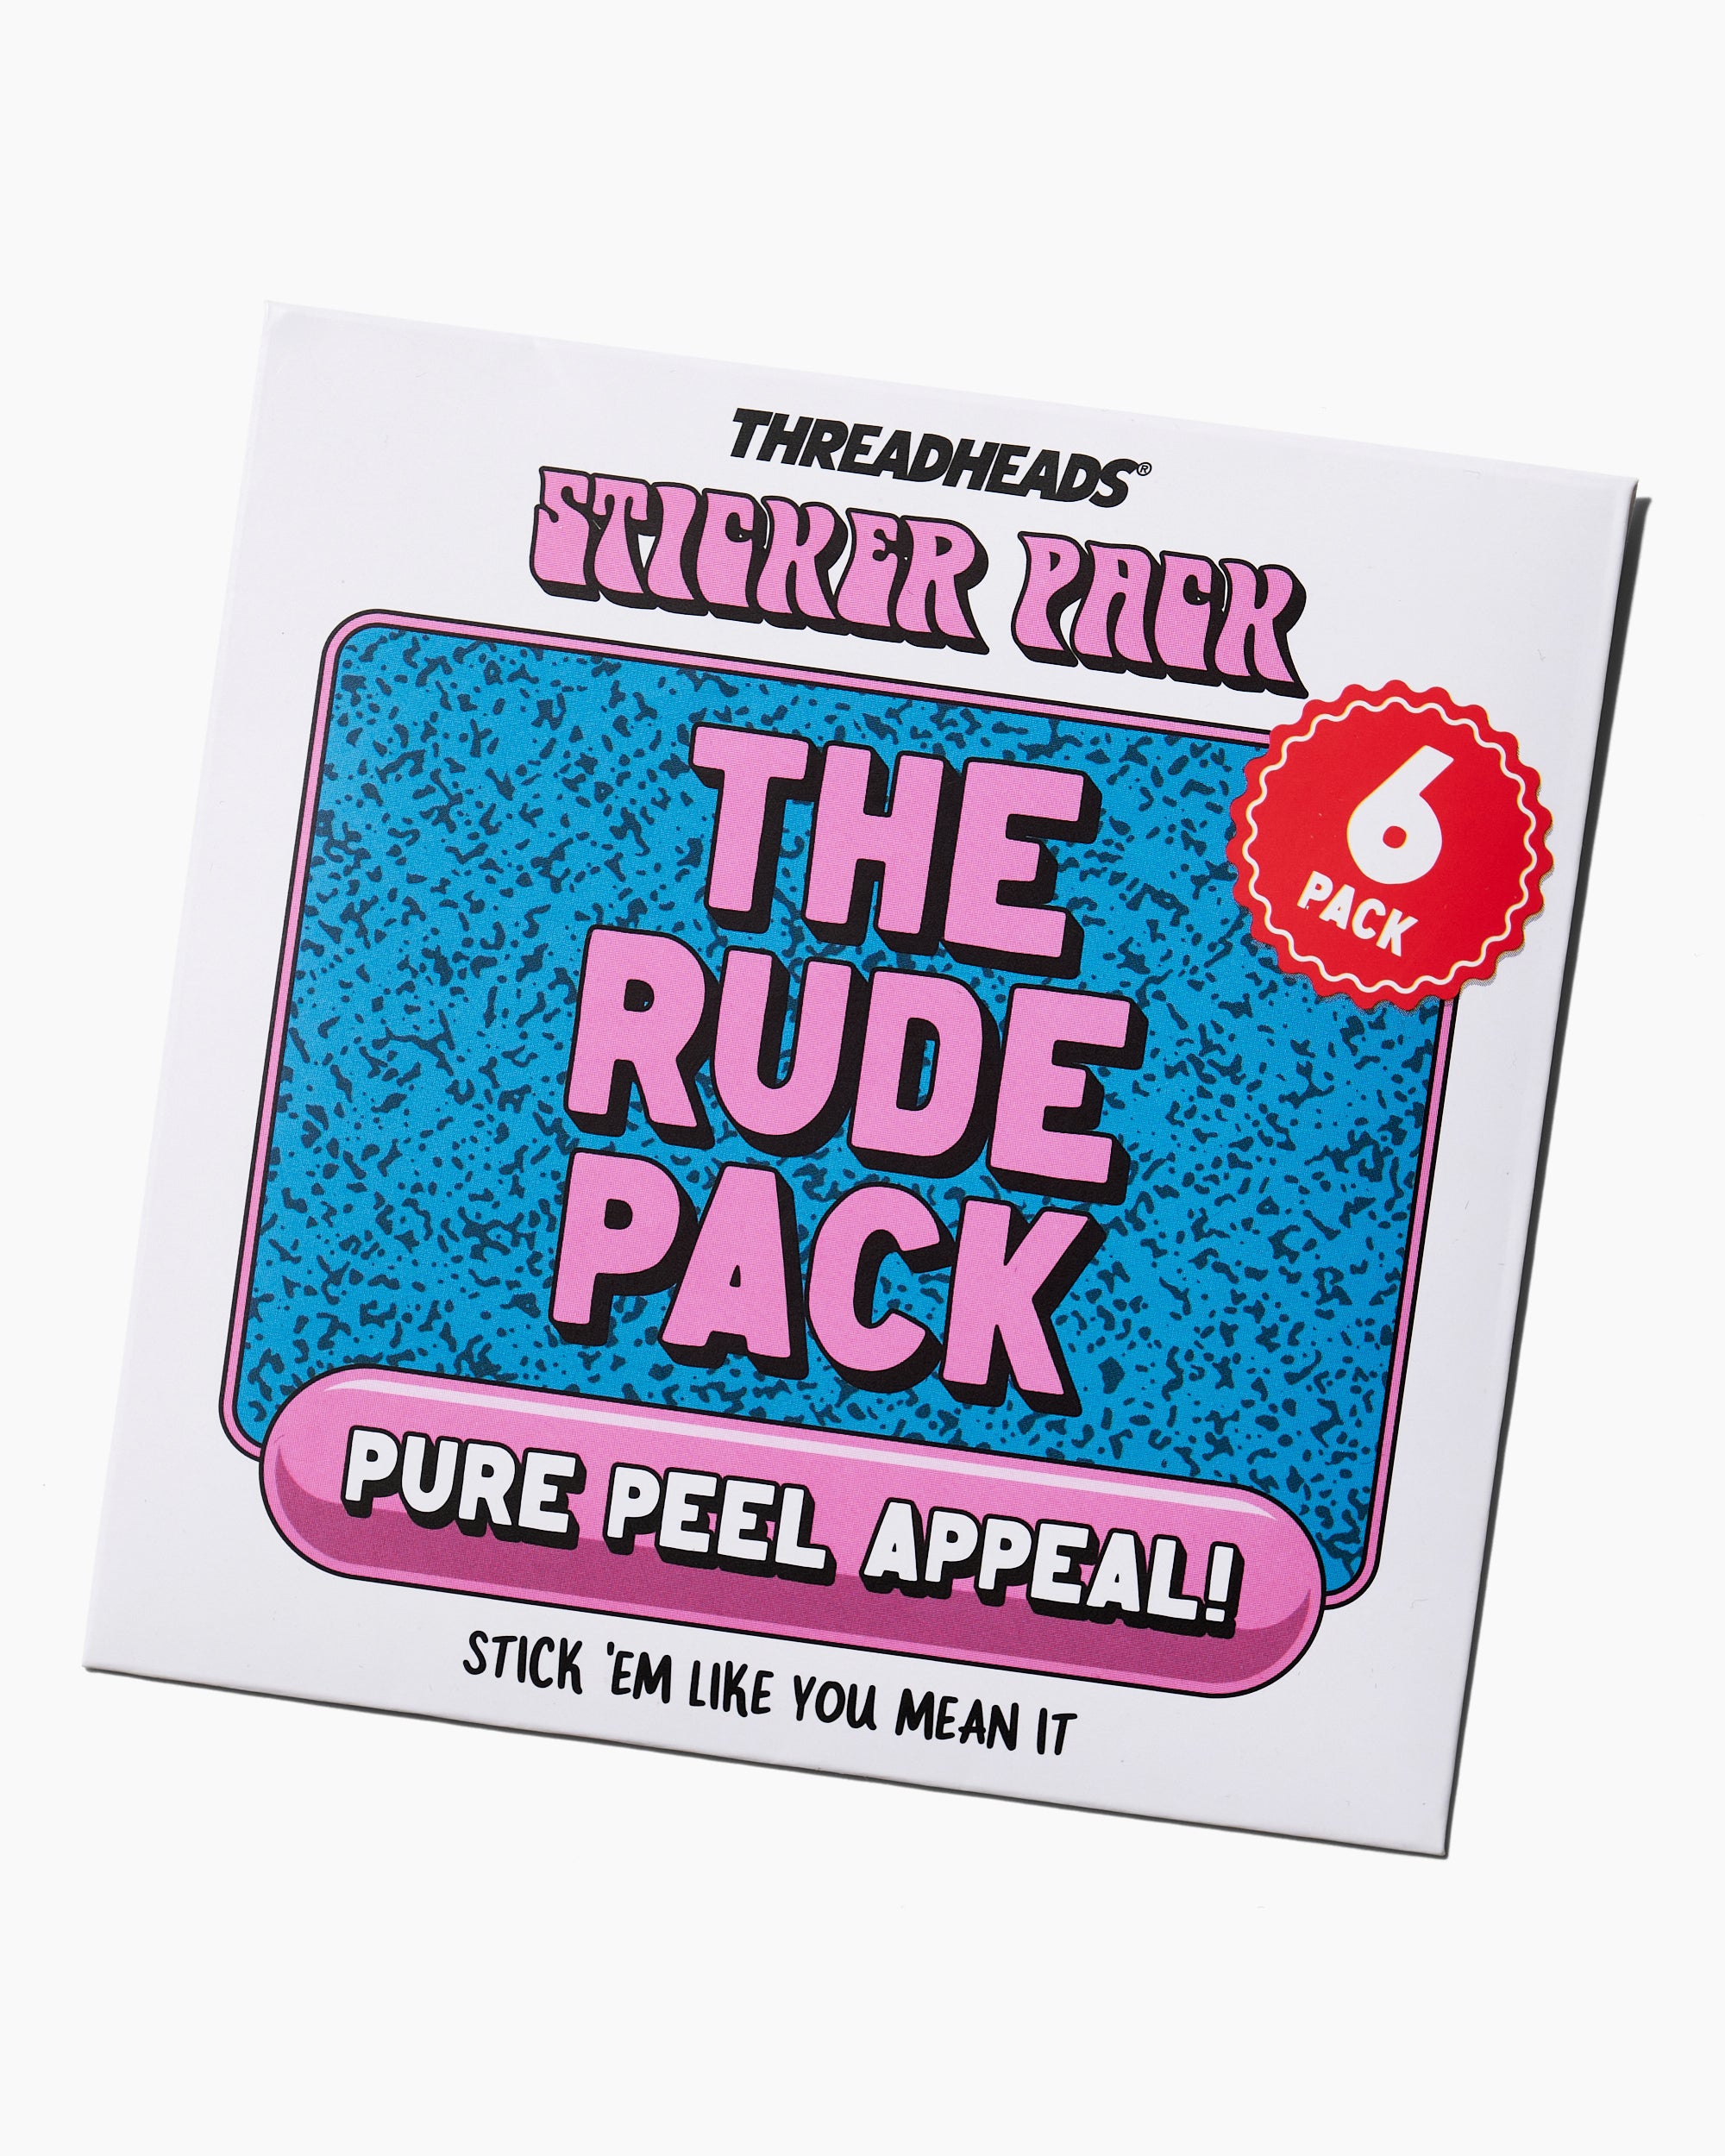 The Rude Sticker Pack